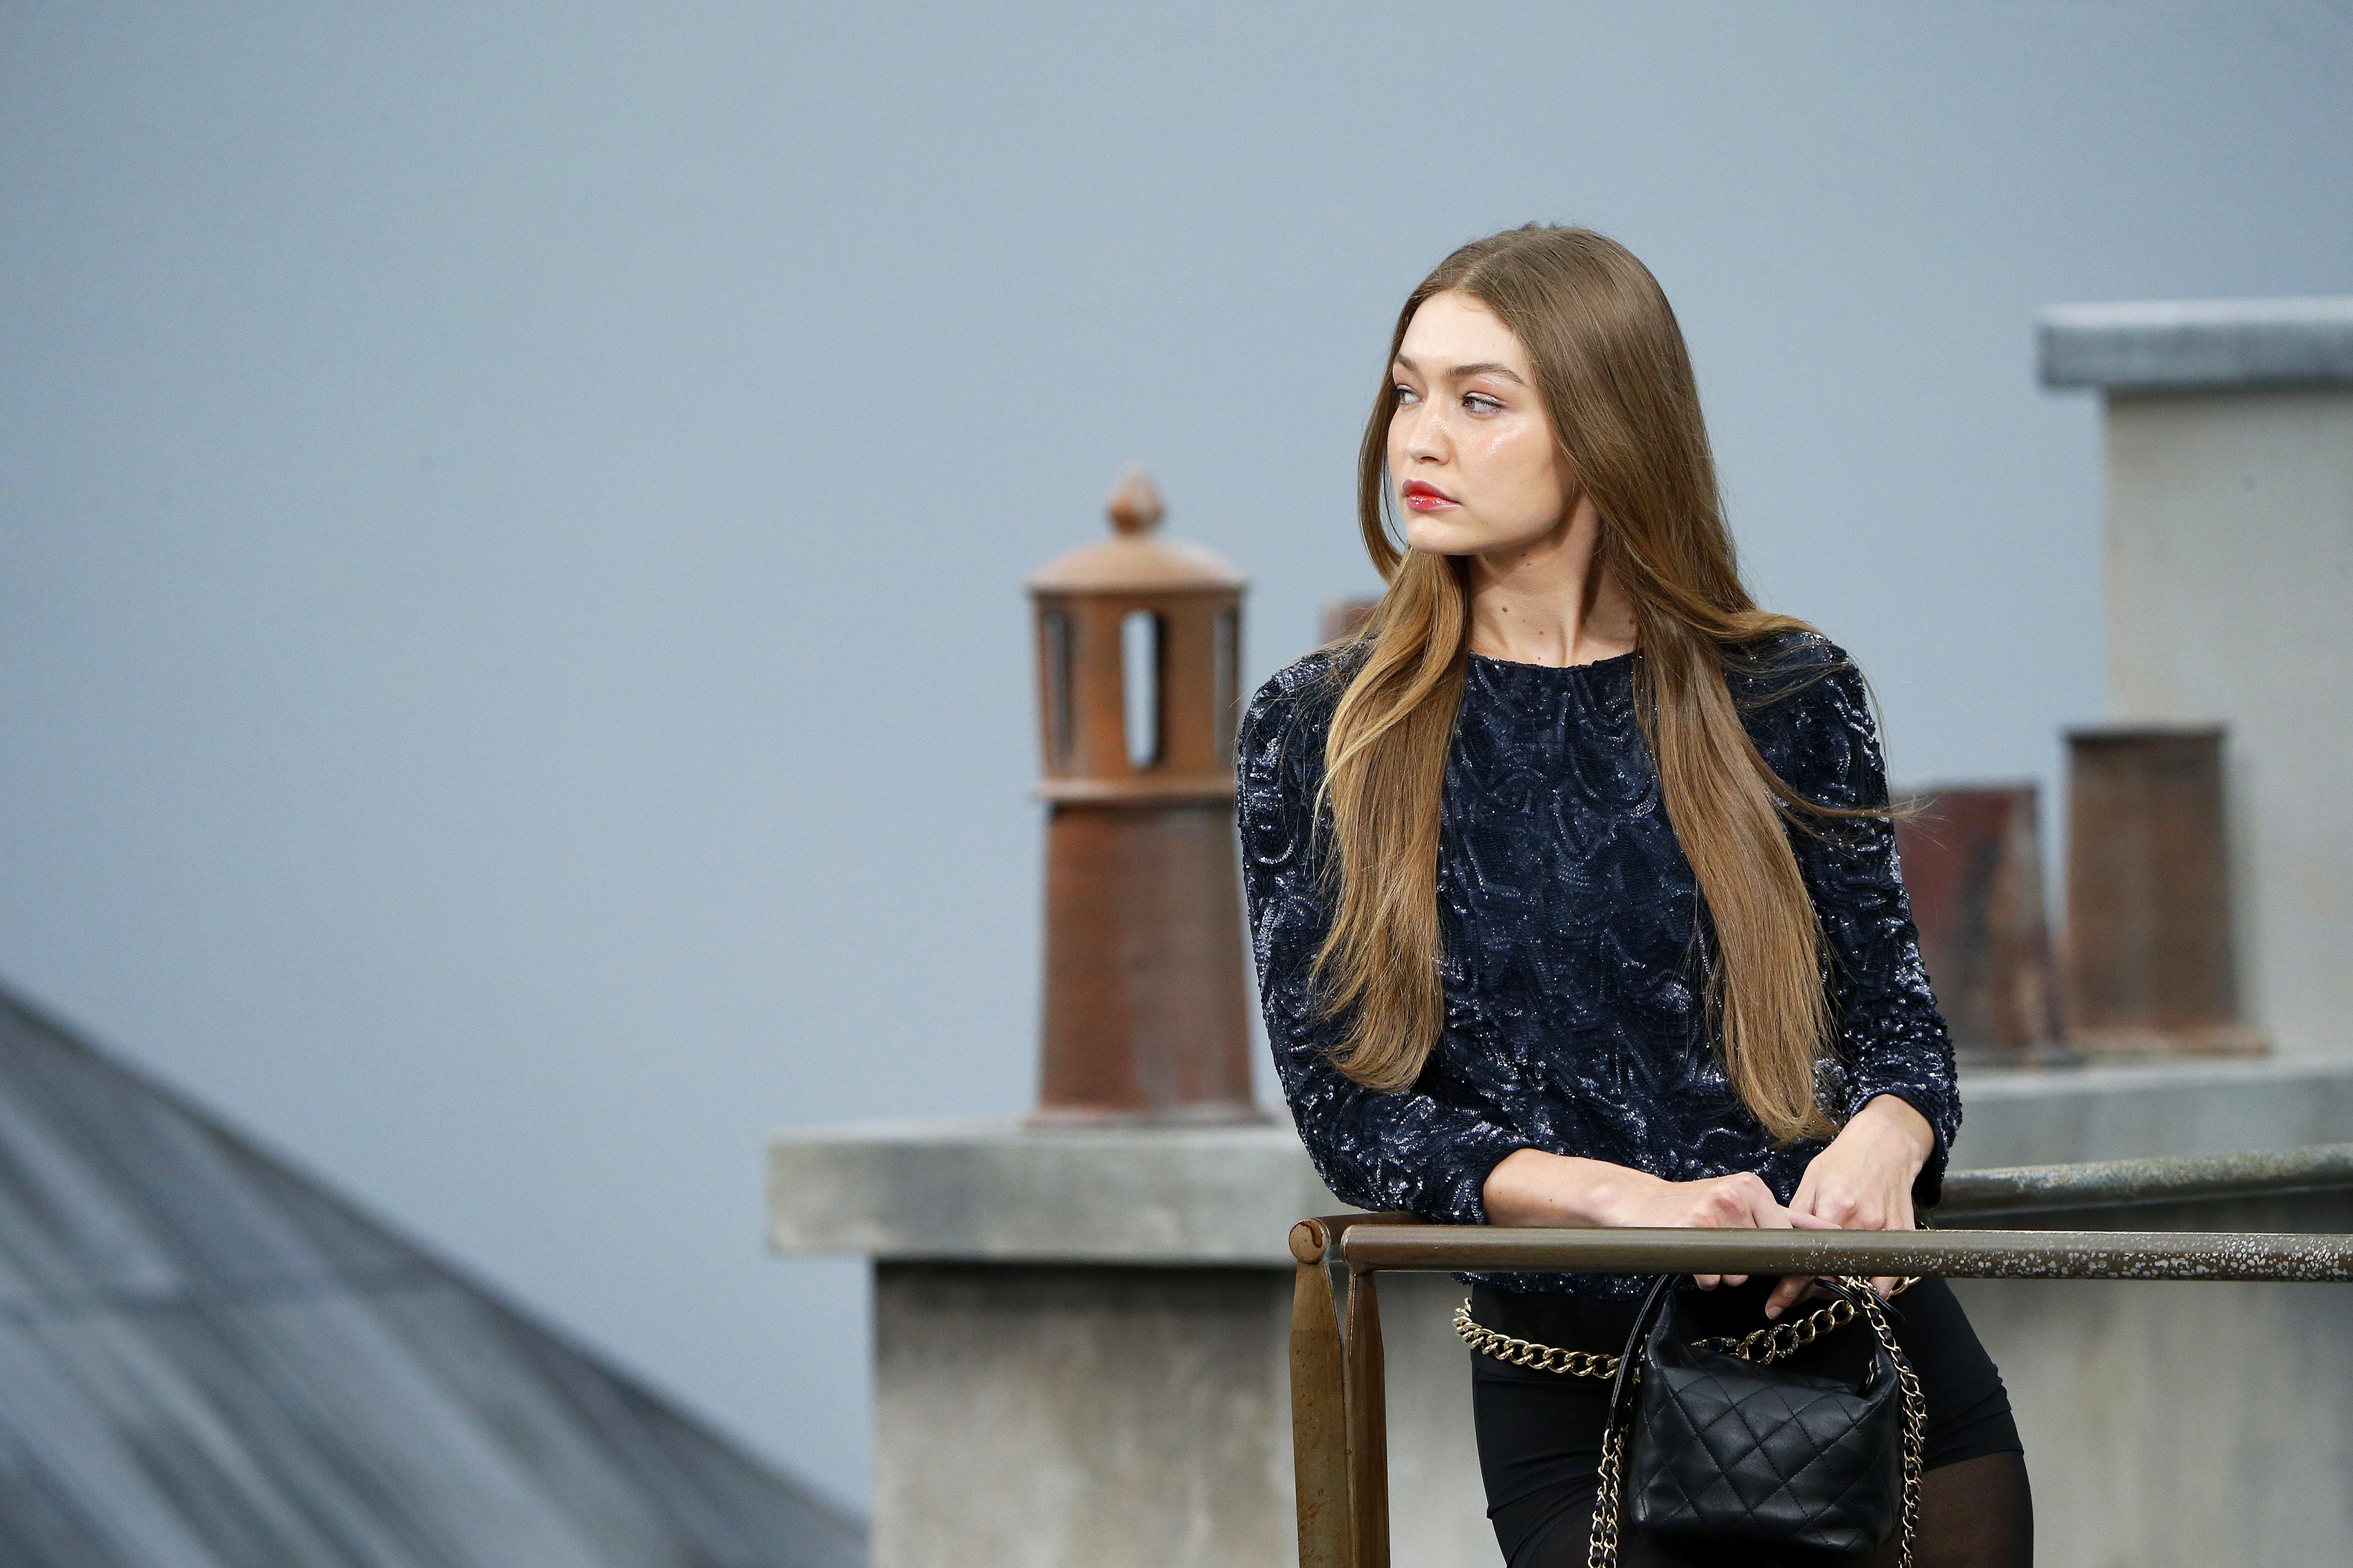 Gigi Hadid marched a French prankster off the Chanel catwalk